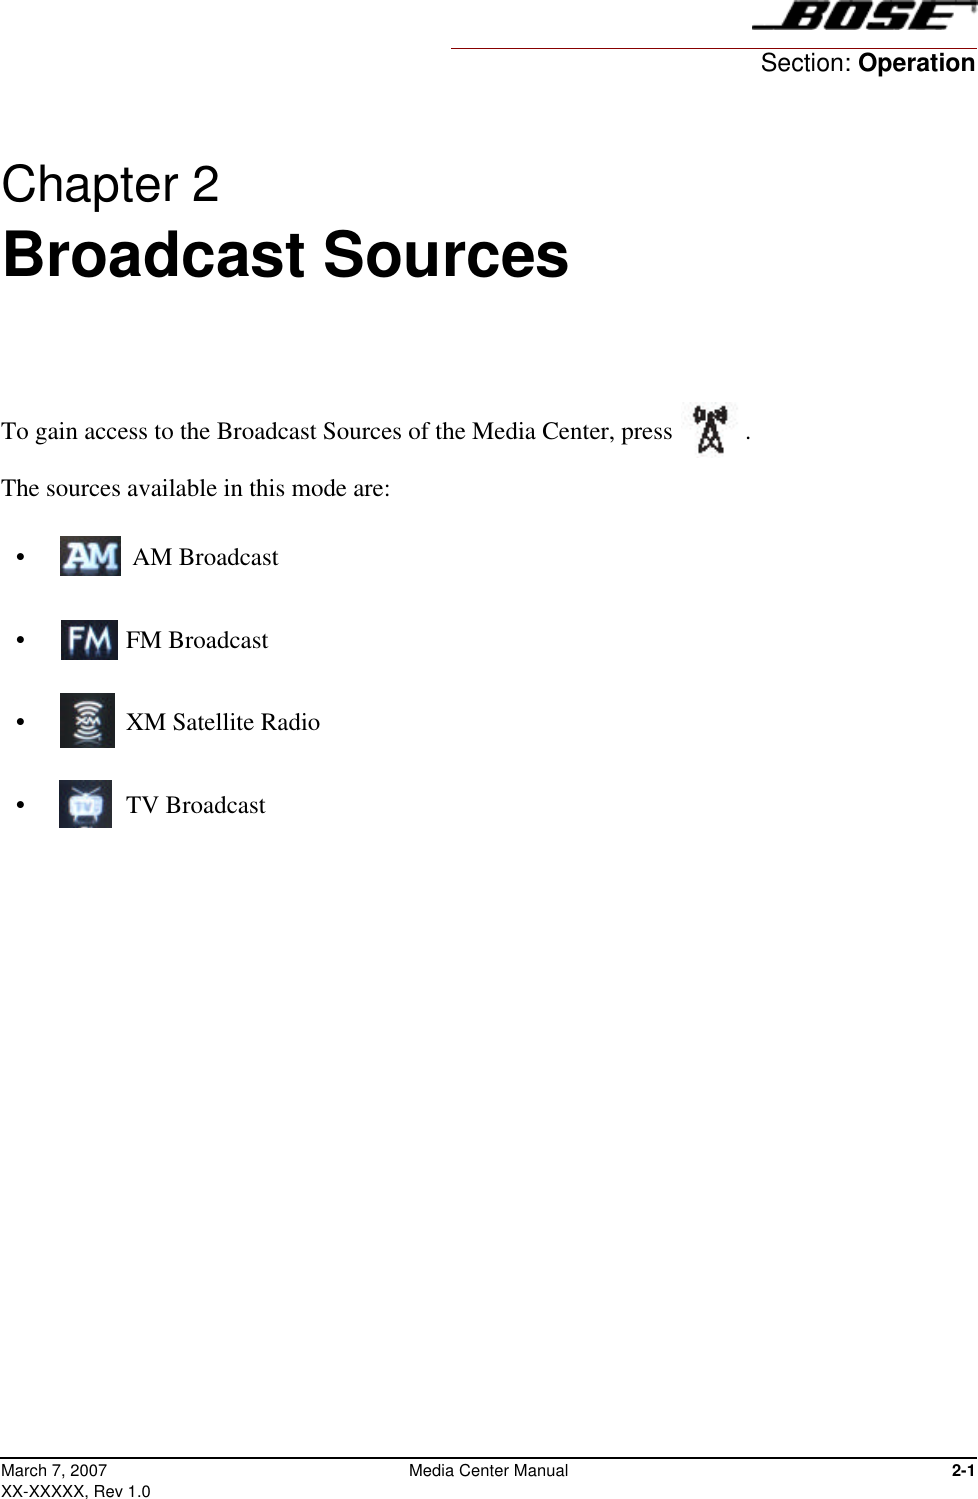 2-1Media Center ManualMarch 7, 2007XX-XXXXX, Rev 1.0Chapter 2 Broadcast Sources To gain access to the Broadcast Sources of the Media Center, press .The sources available in this mode are:•   AM Broadcast•   FM Broadcast•   XM Satellite Radio•   TV BroadcastSection: Operation